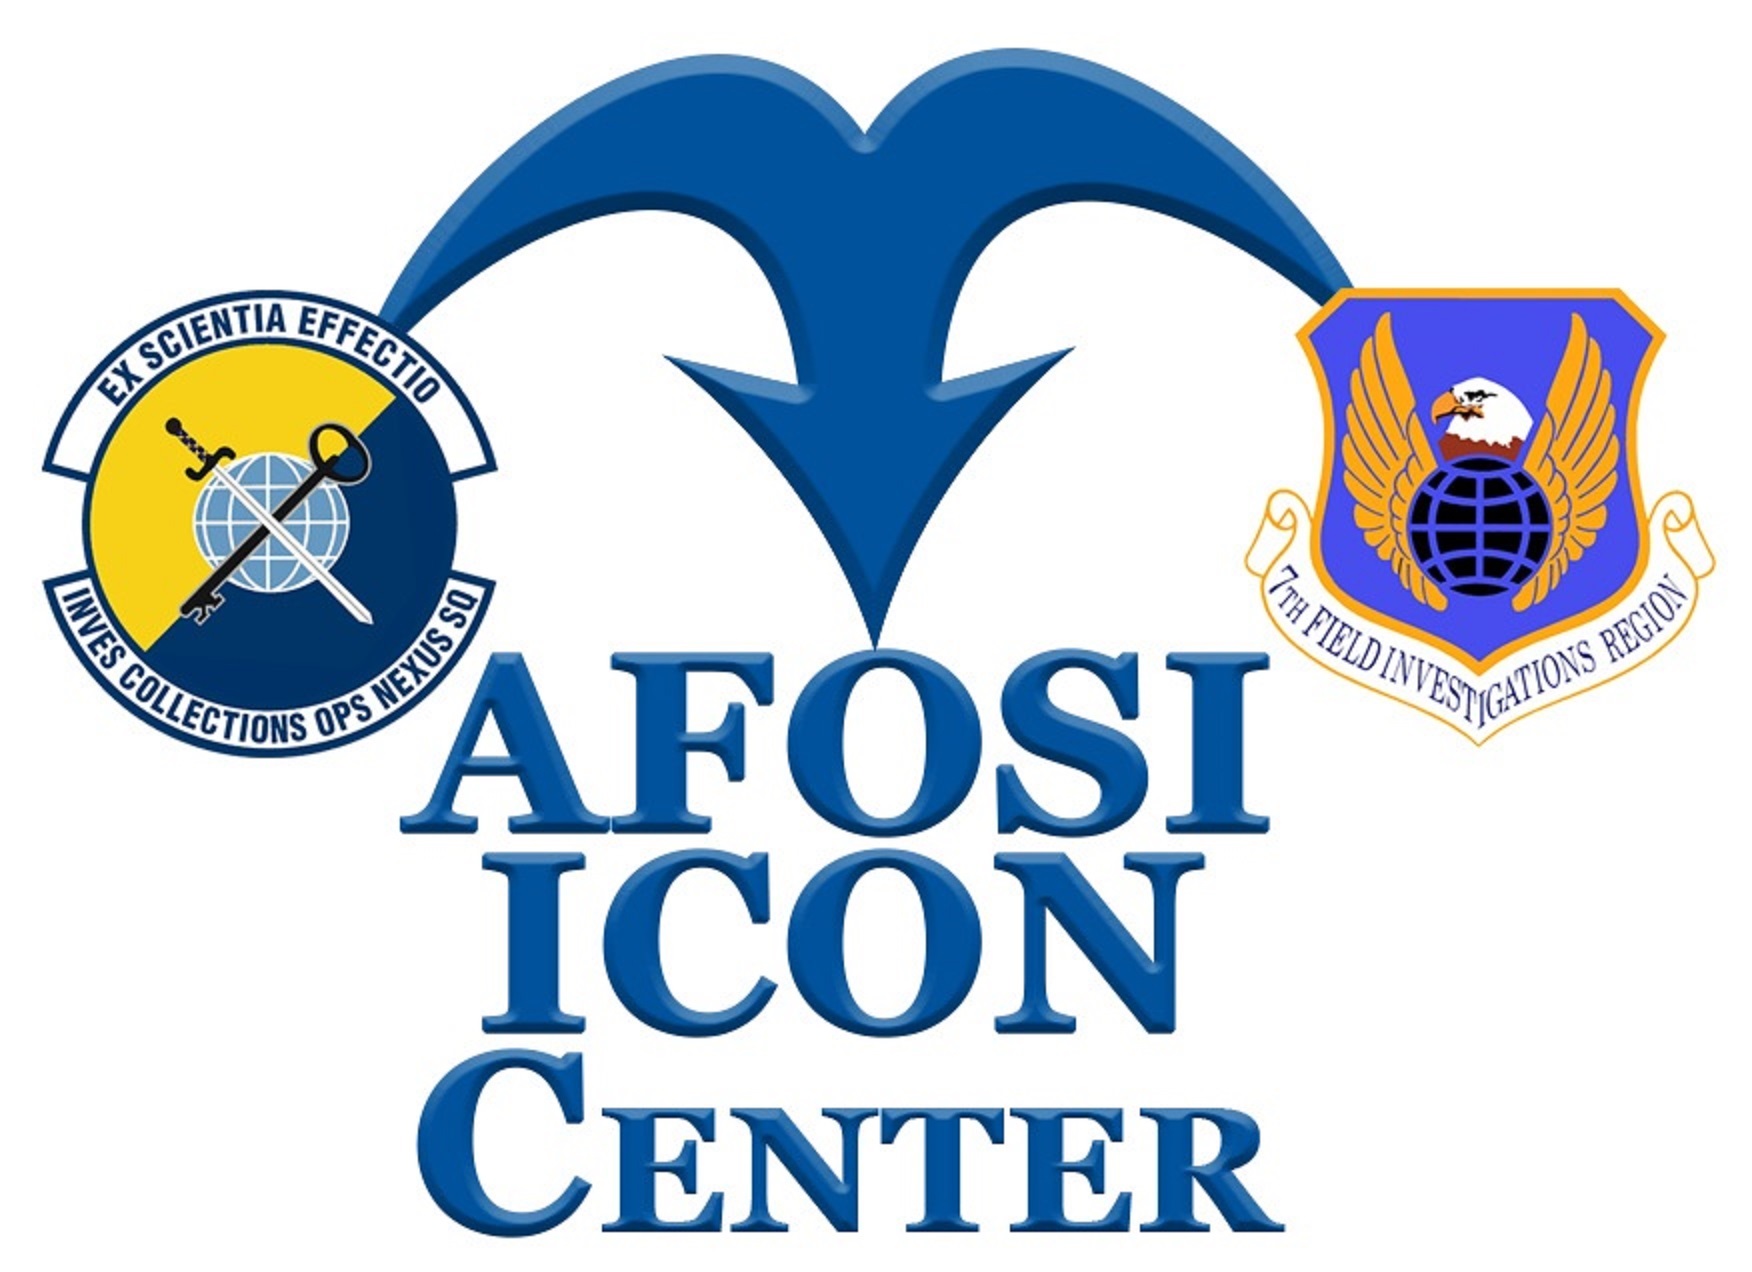 afosi foreign travel